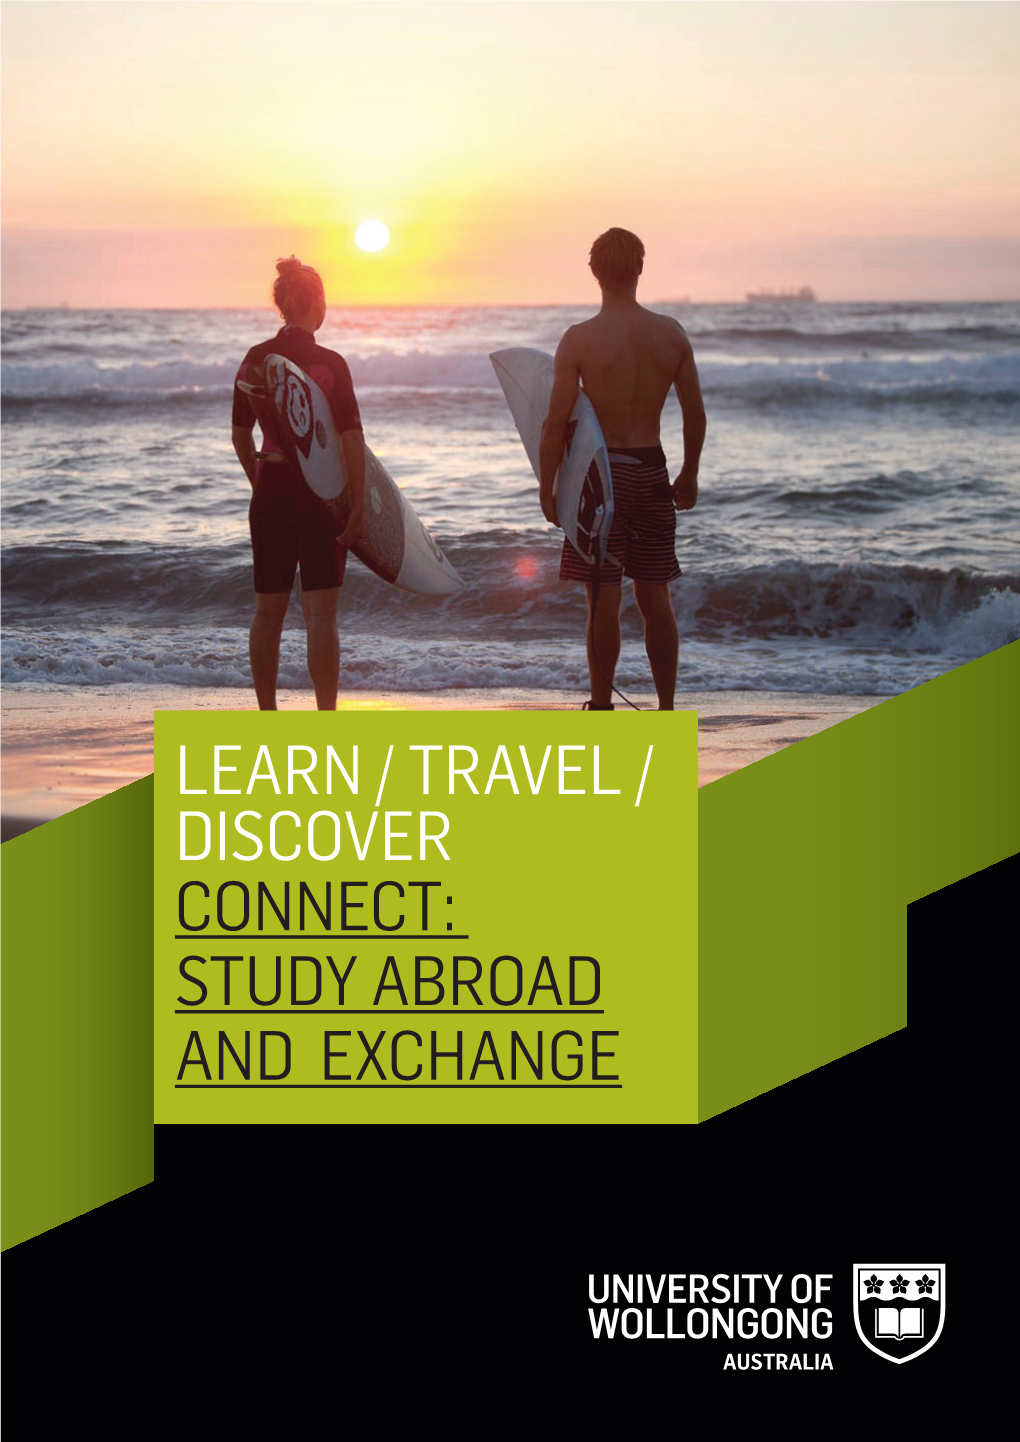 Connect: Study Abroad and Exchange